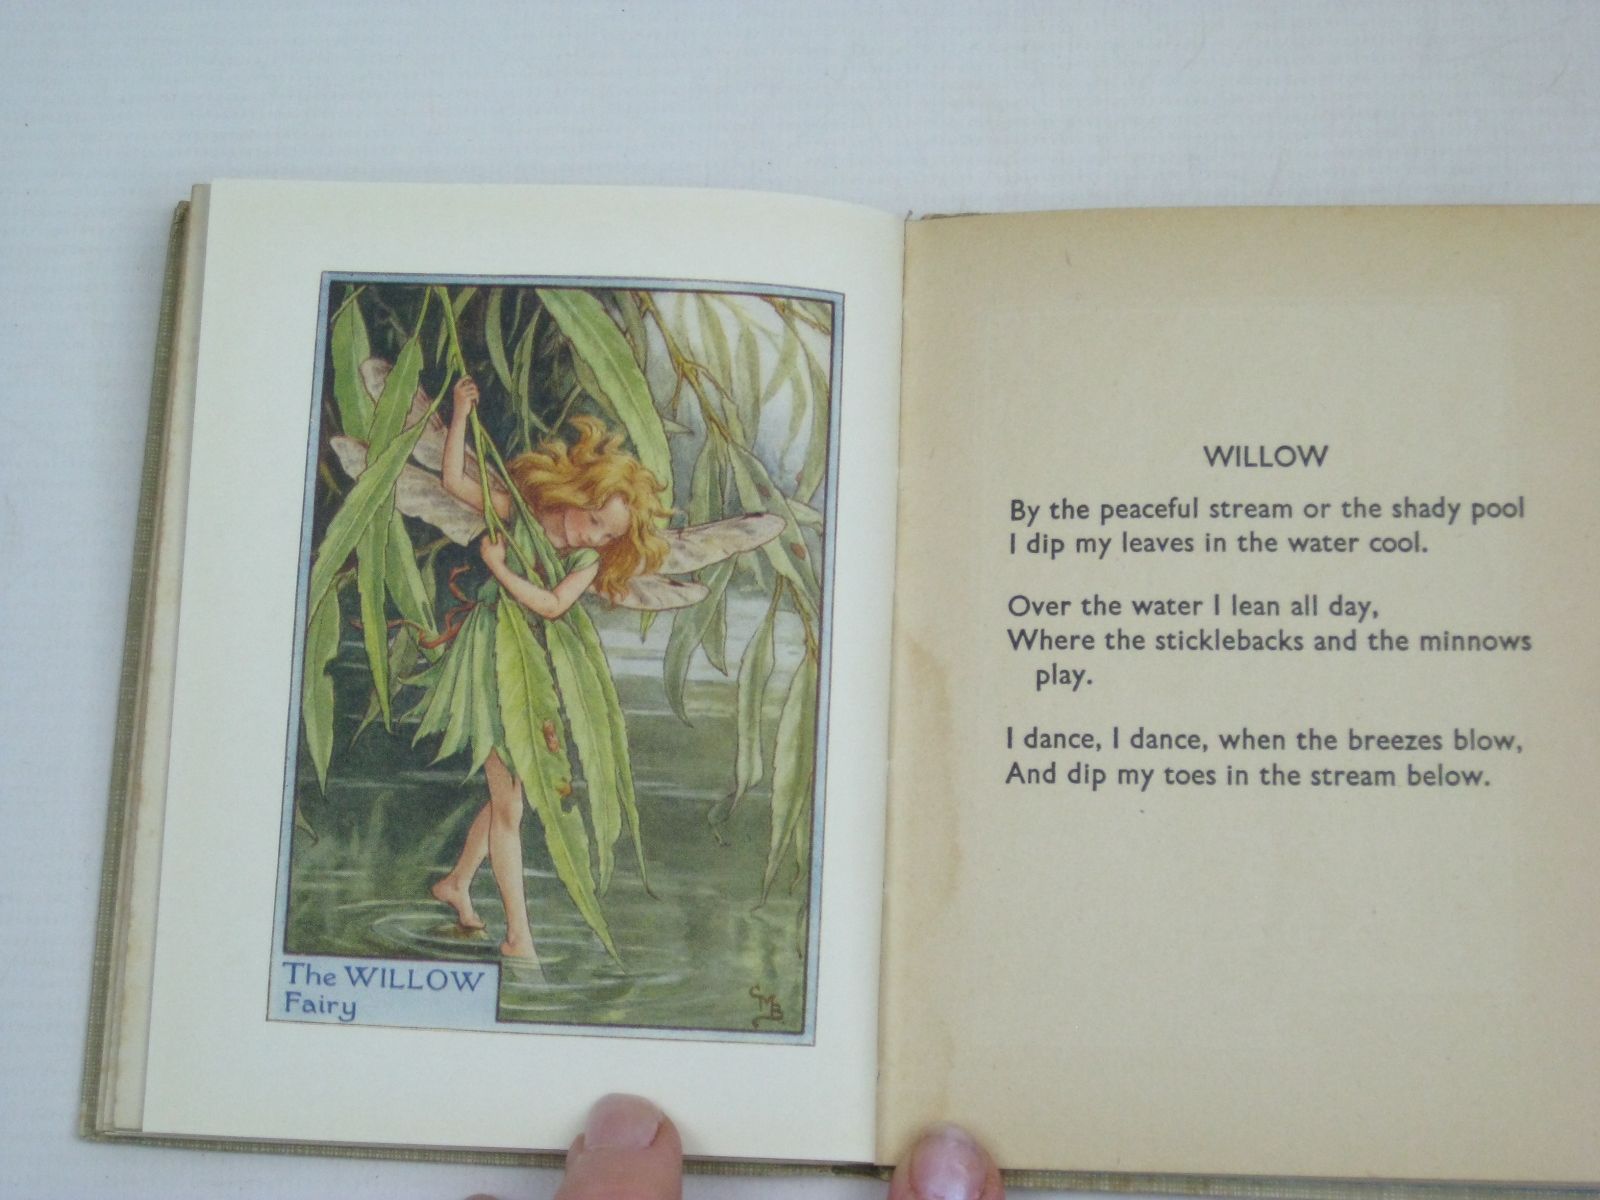 Photo of FAIRIES OF THE TREES written by Barker, Cicely Mary illustrated by Barker, Cicely Mary published by Blackie & Son Ltd. (STOCK CODE: 1405768)  for sale by Stella & Rose's Books